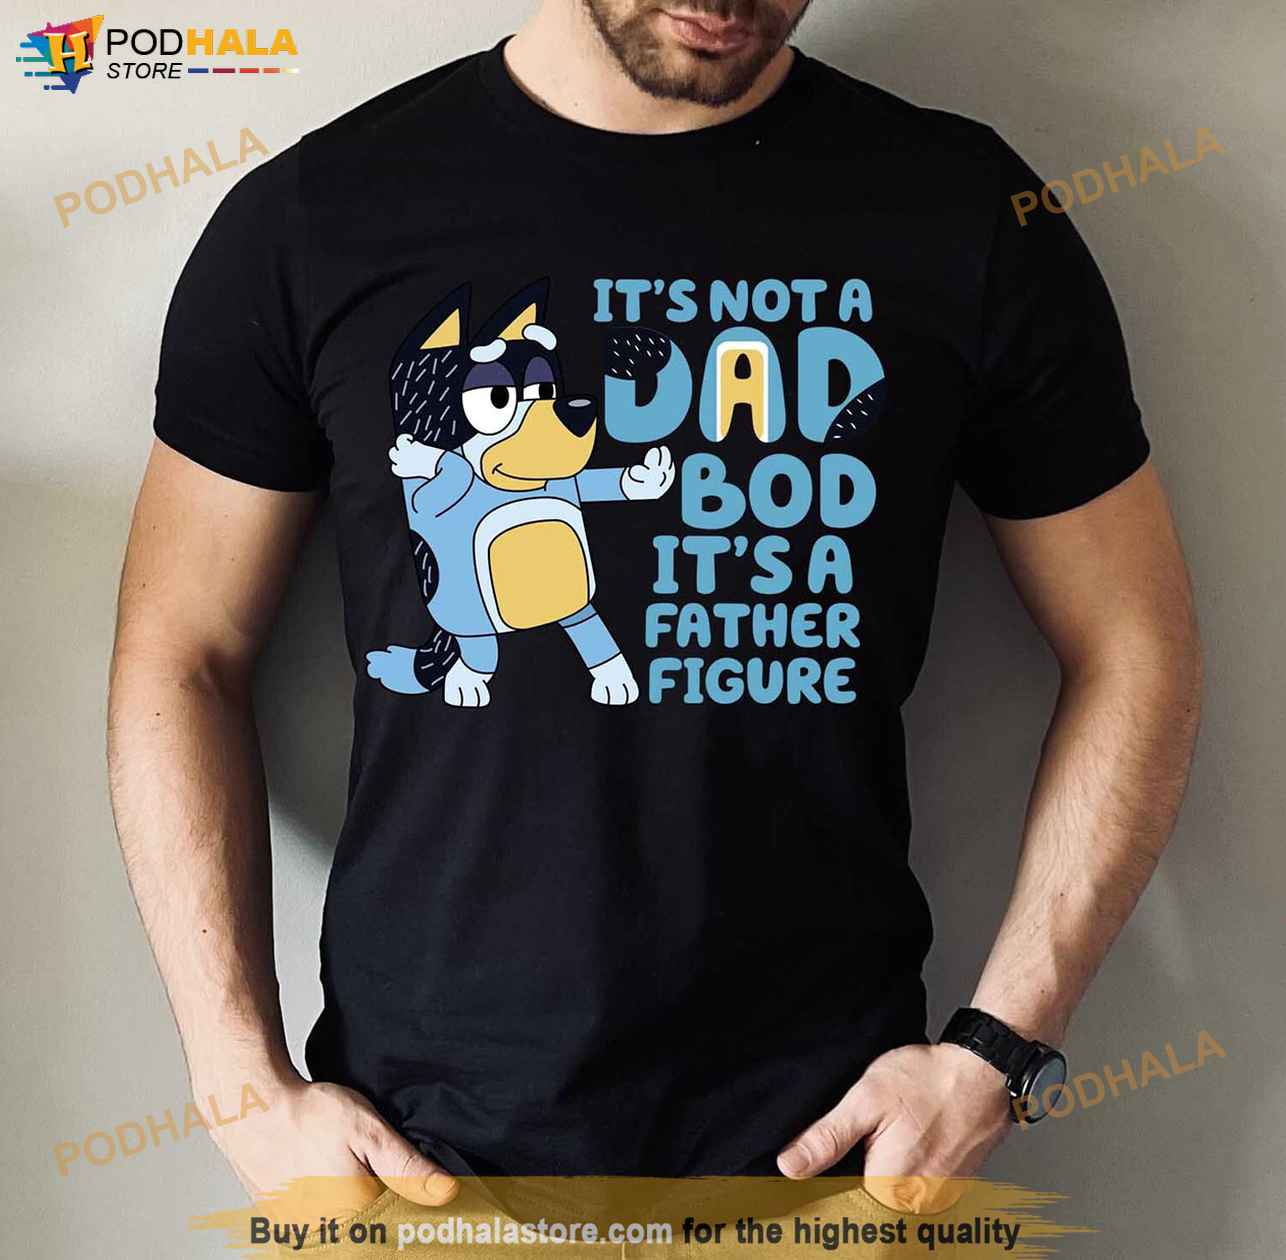 Bluey Dad Life Fathers Day Gift T Shirt - Jolly Family Gifts